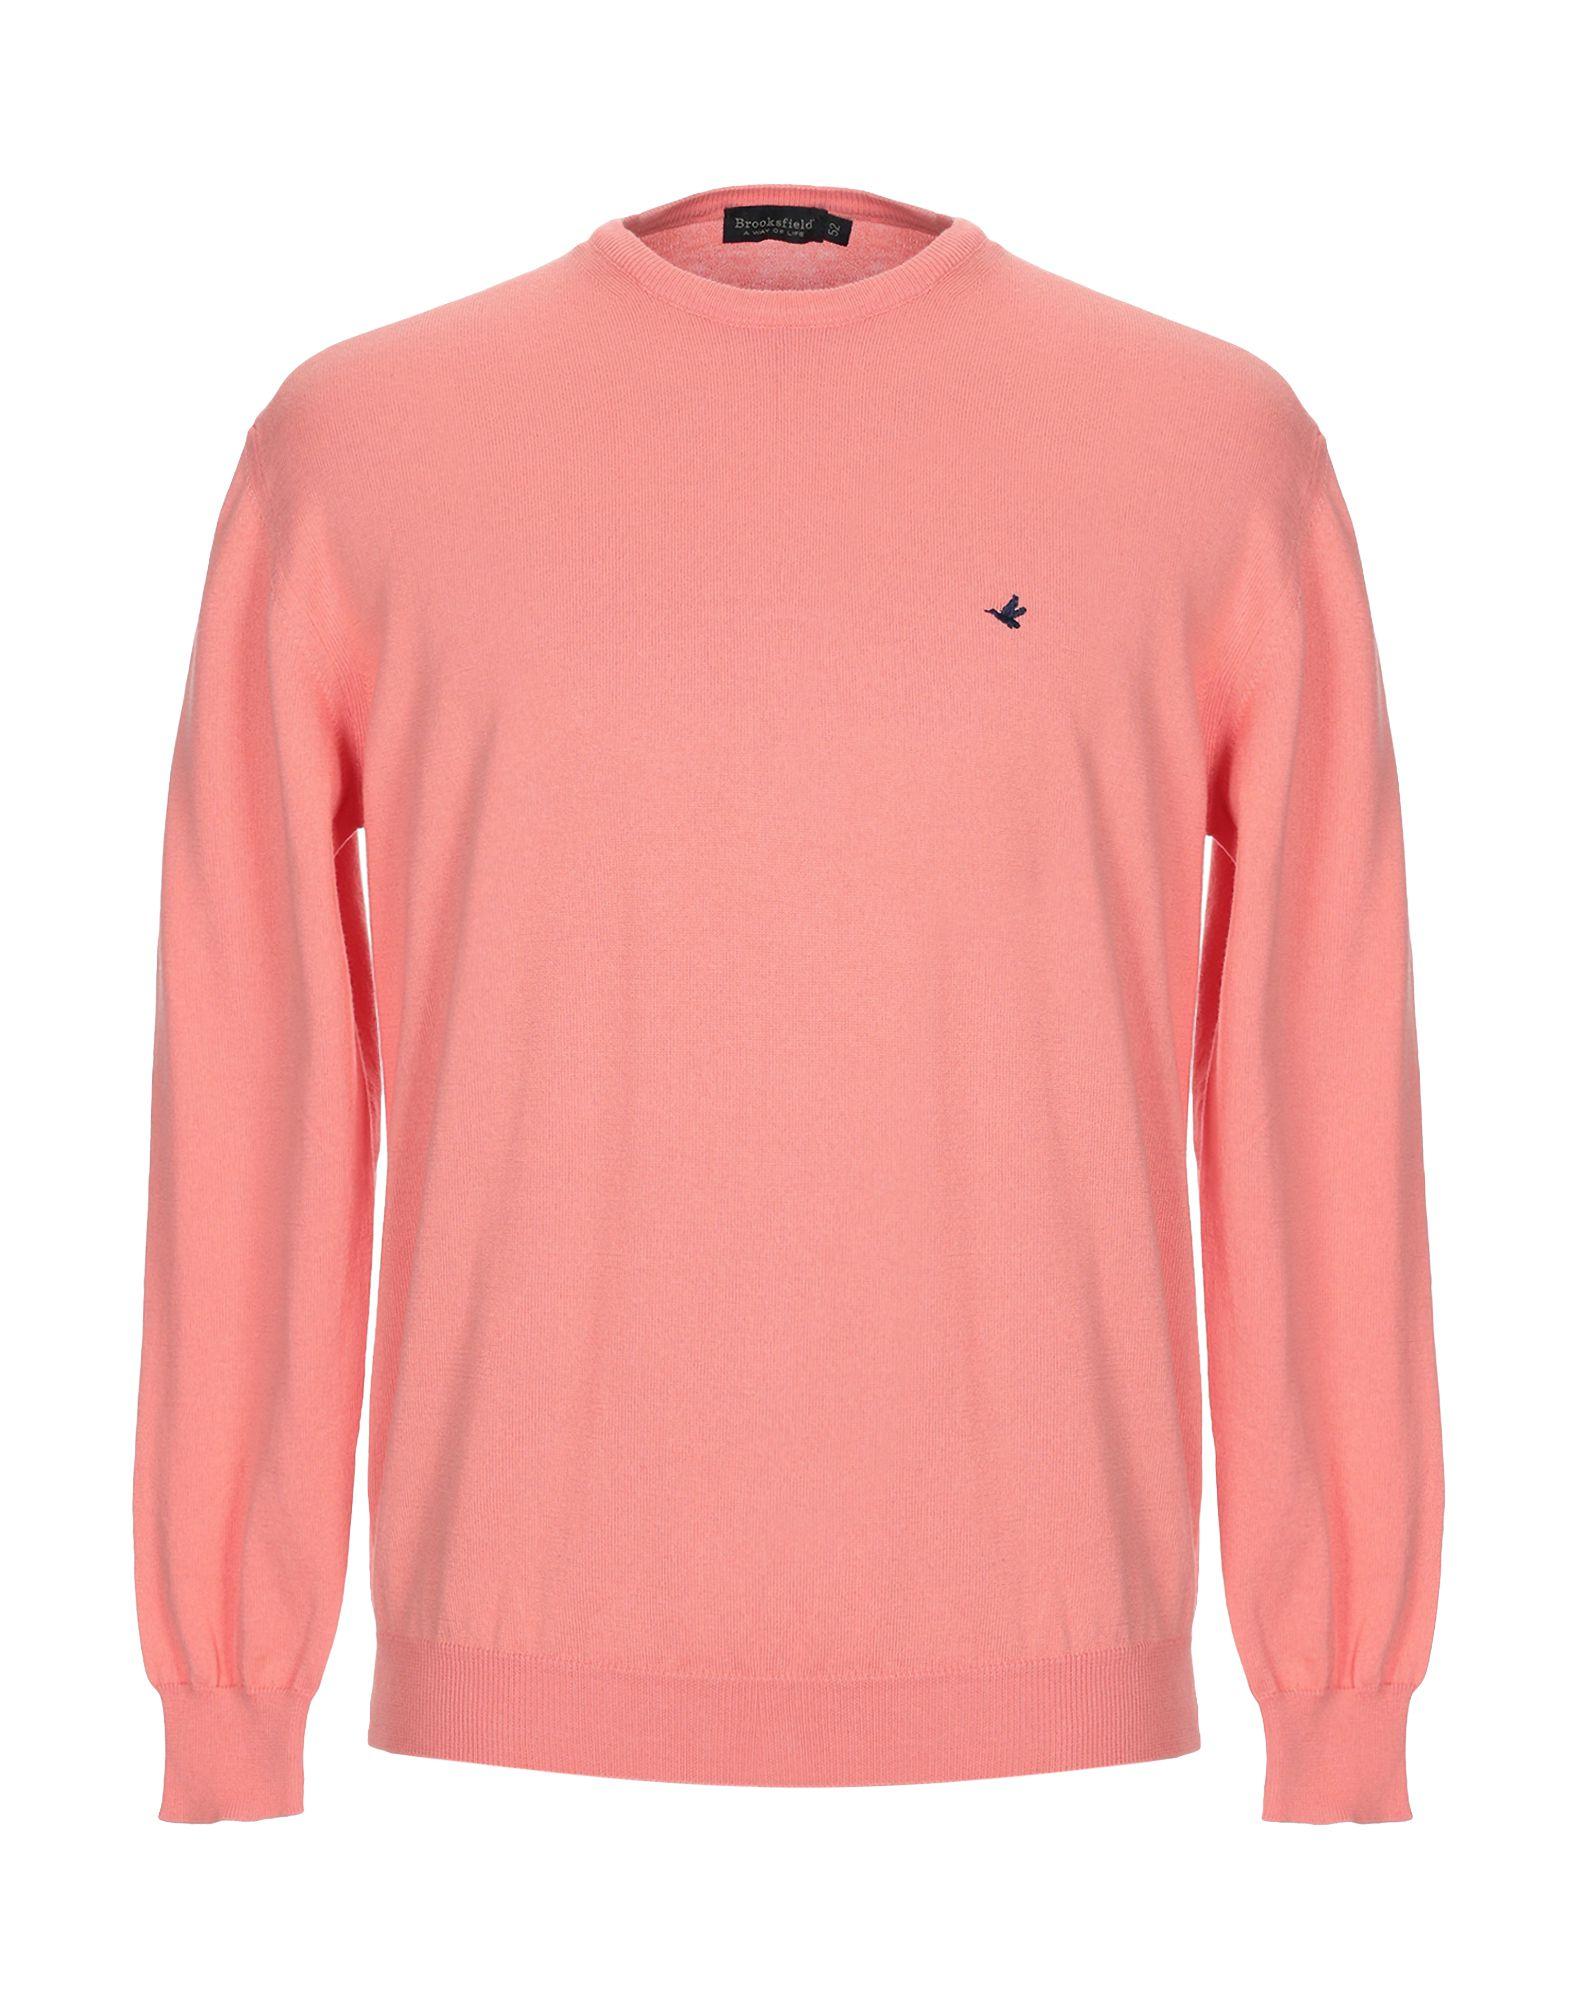 Brooksfield Cotton Jumper in Salmon Pink (Pink) for Men - Lyst